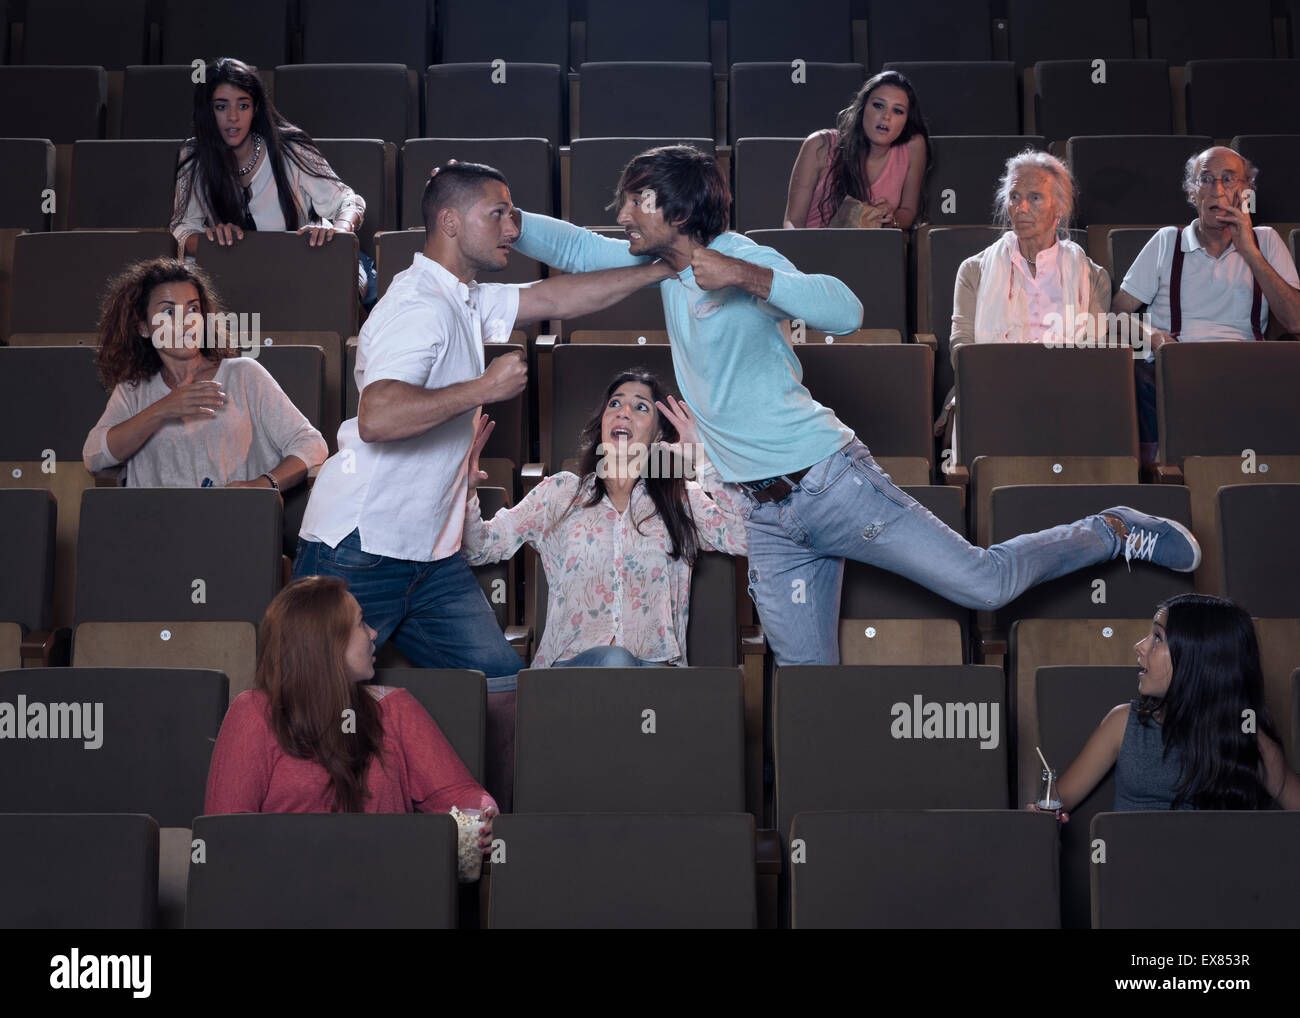 Two men fighting at a movie theater. Stock Photo